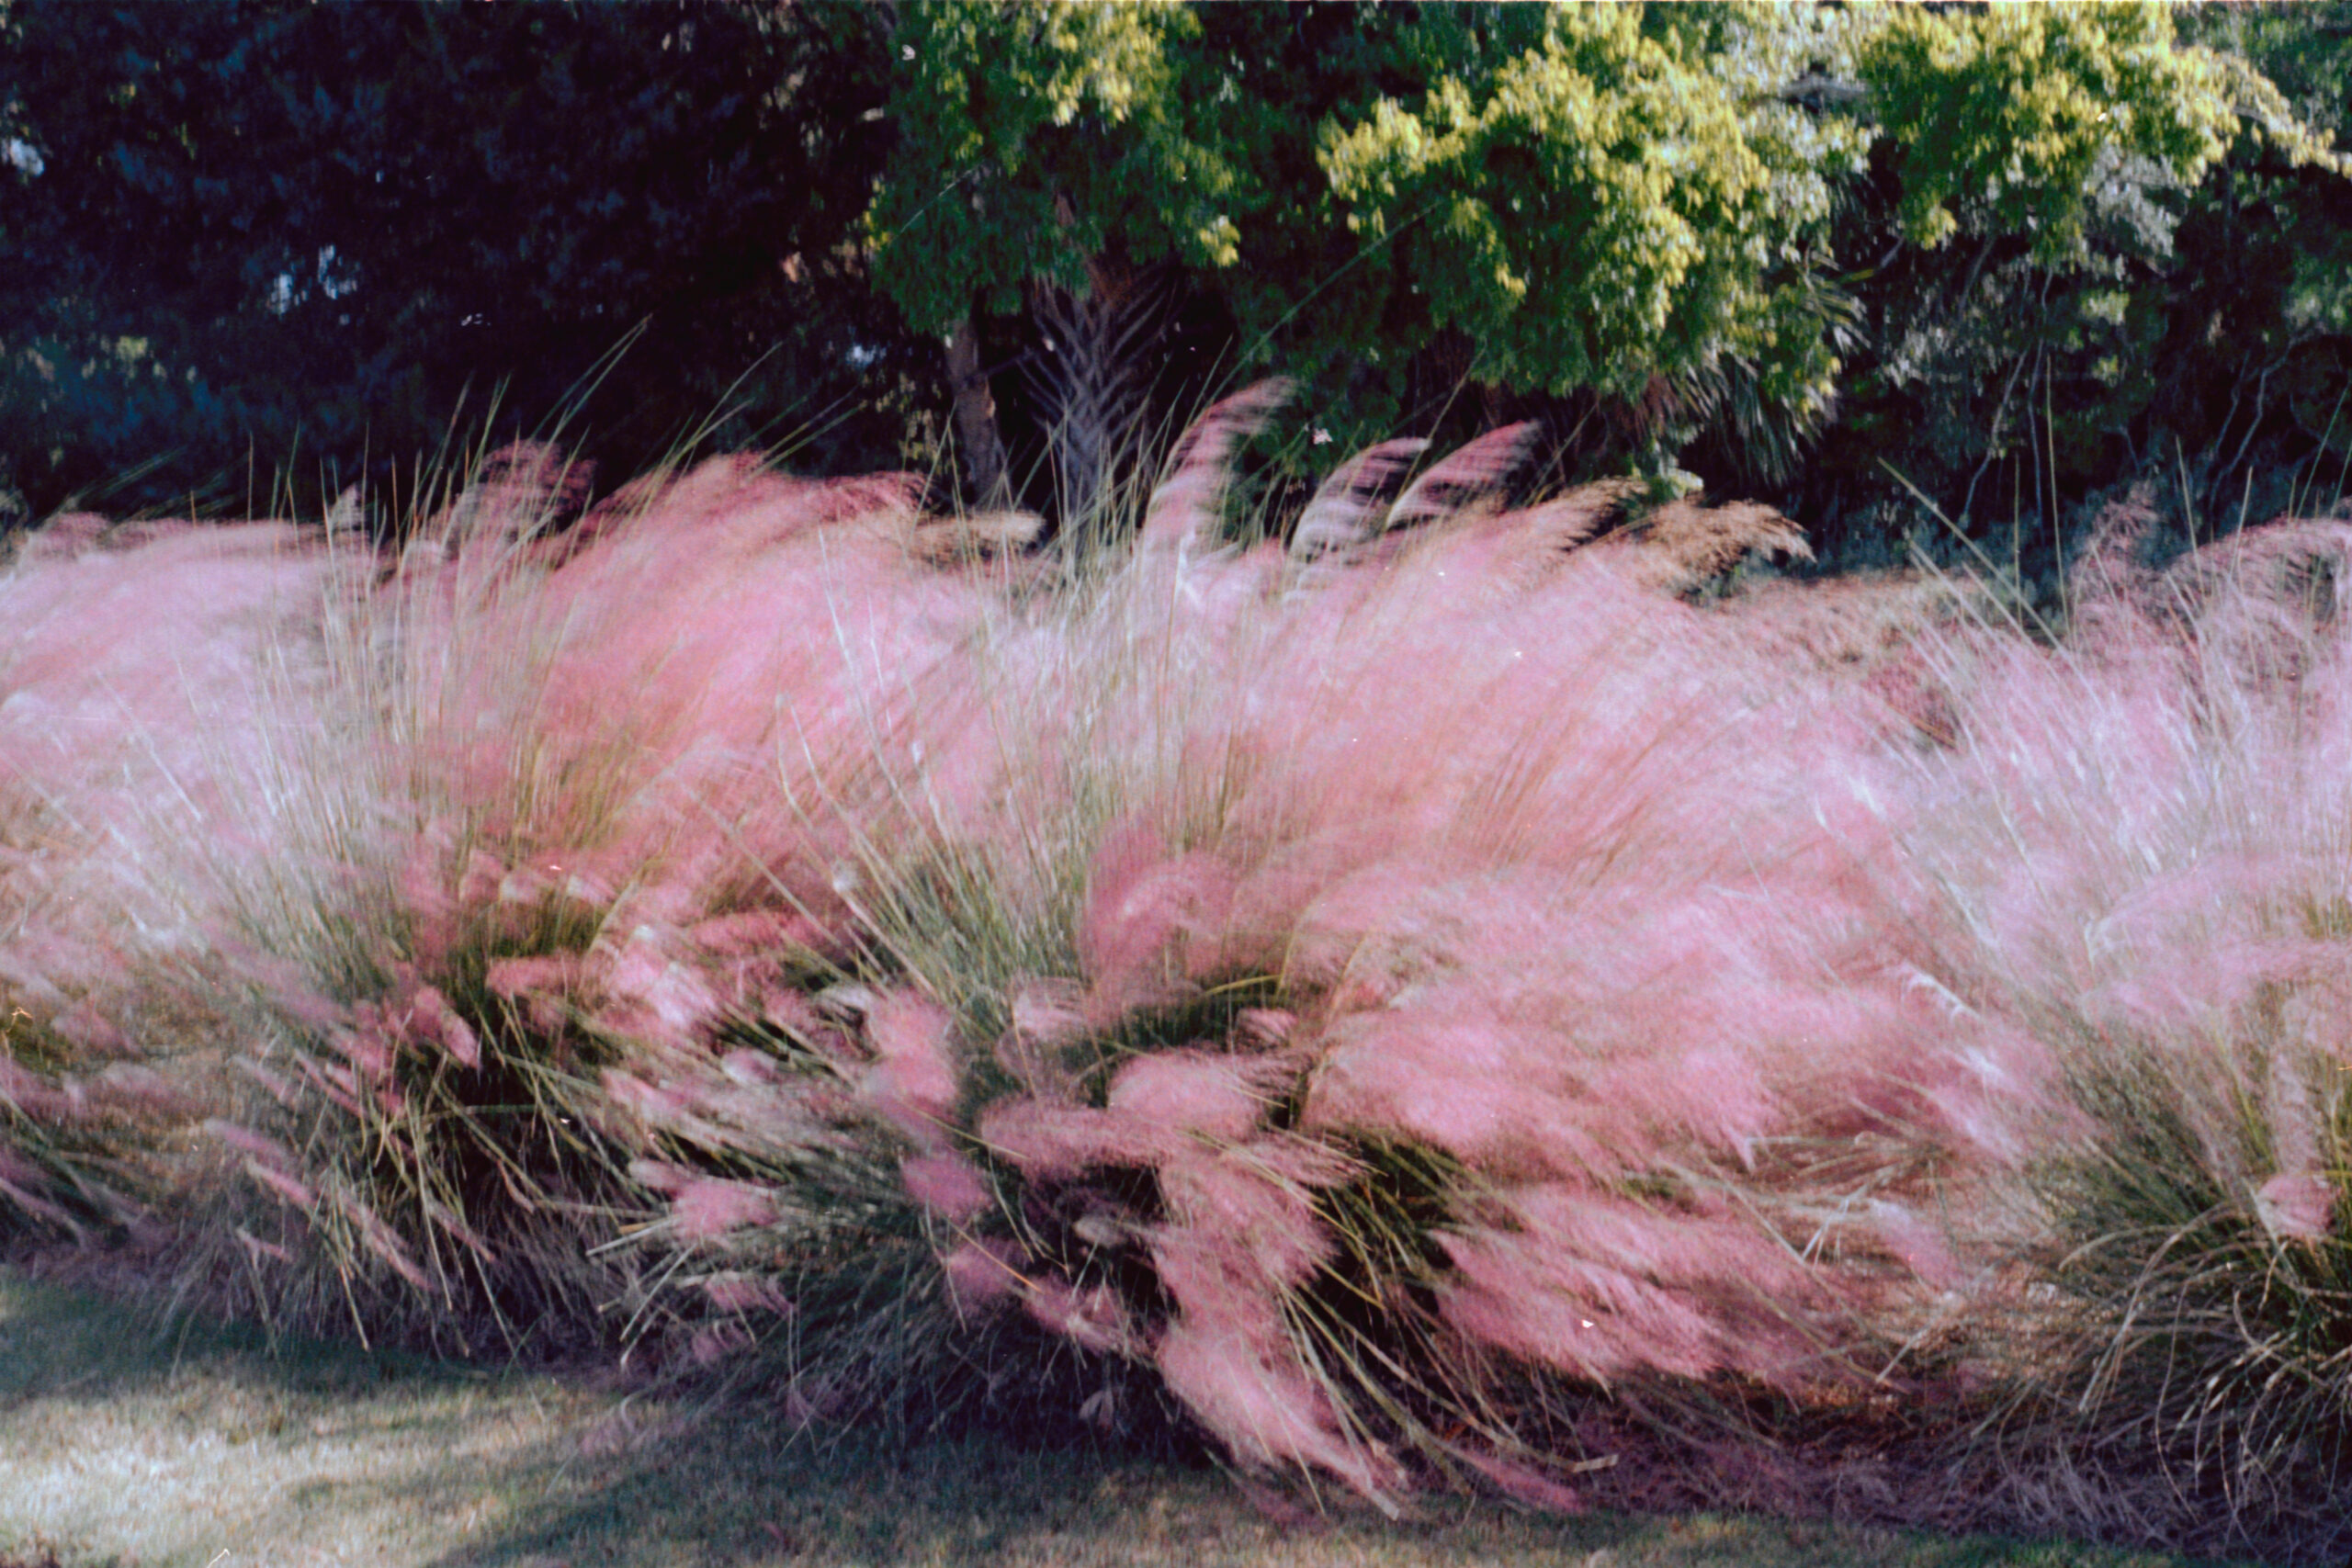 Color photograph of feathery pink plantings in an outdoor setting